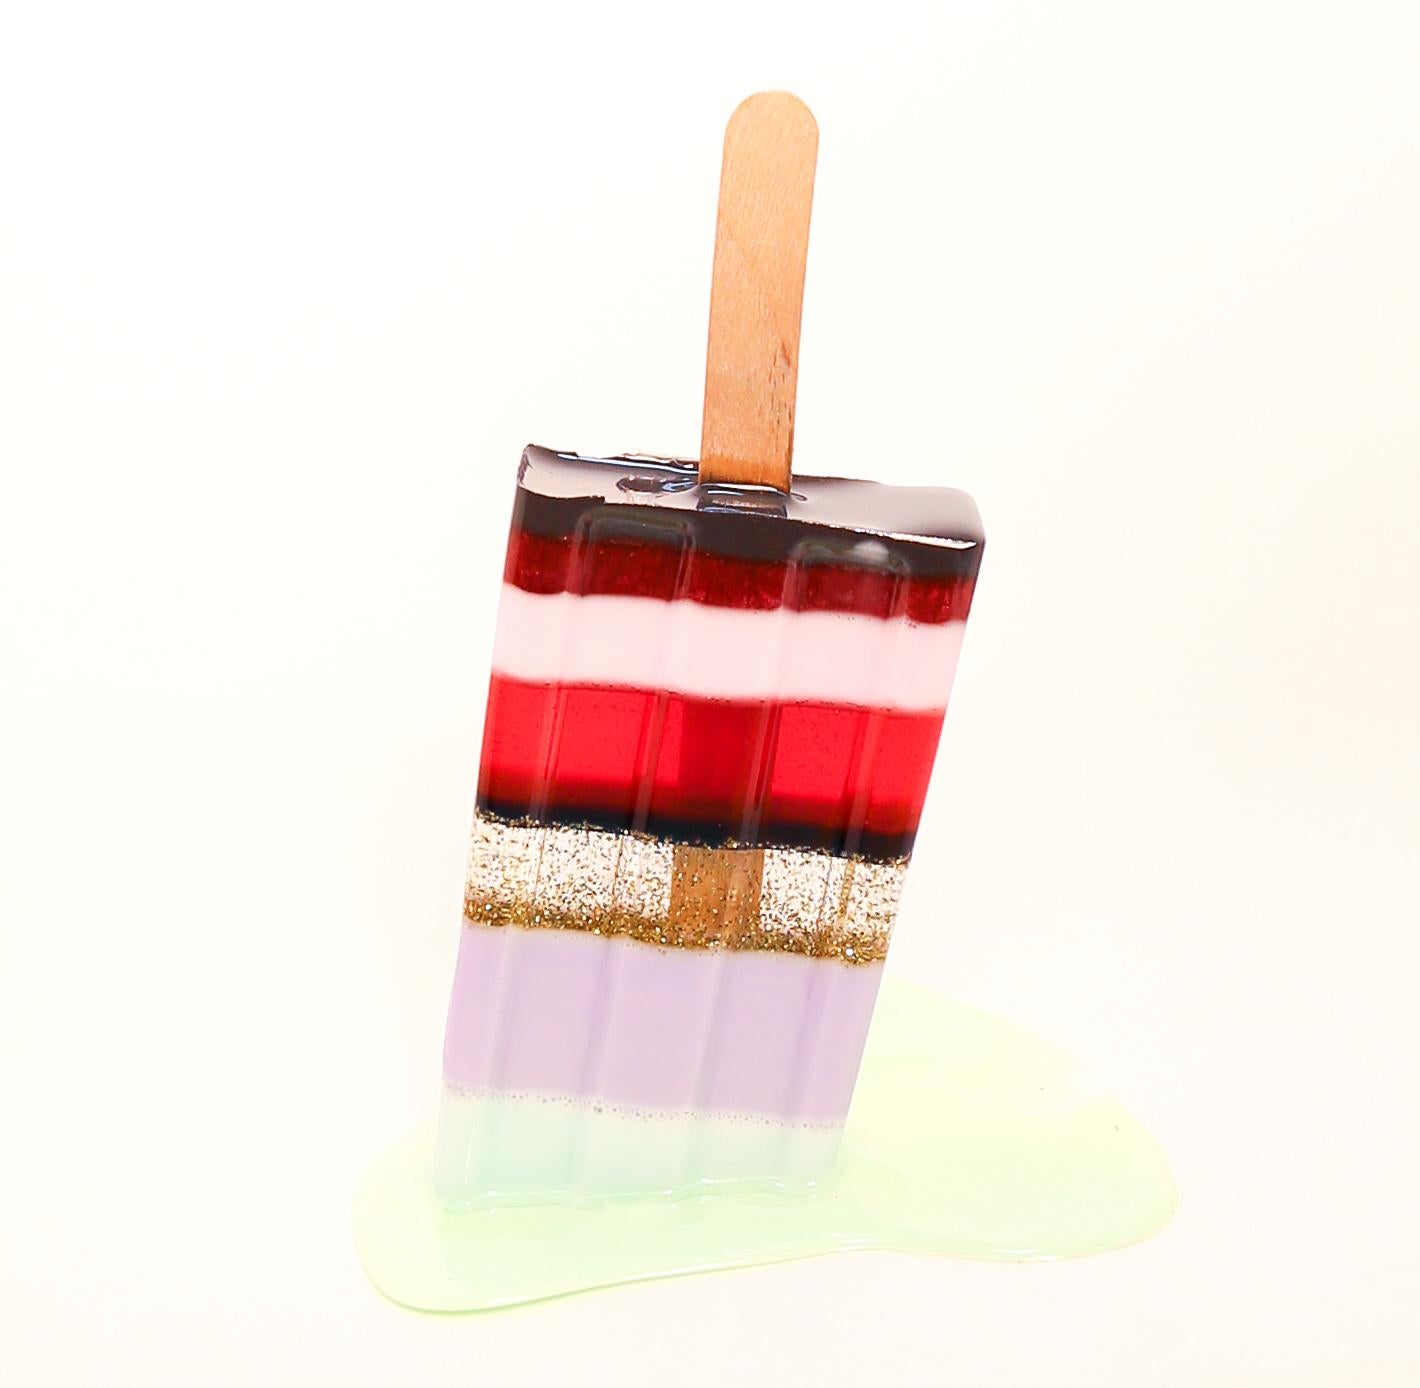 This is a brand new, original resin sculpture by Betsy Enzensberger. It was made with resin, glitter and ink.  This is a life-size sculpture, weighing just a couple of ounces. This popsicle has a large transparent melt which makes an interesting